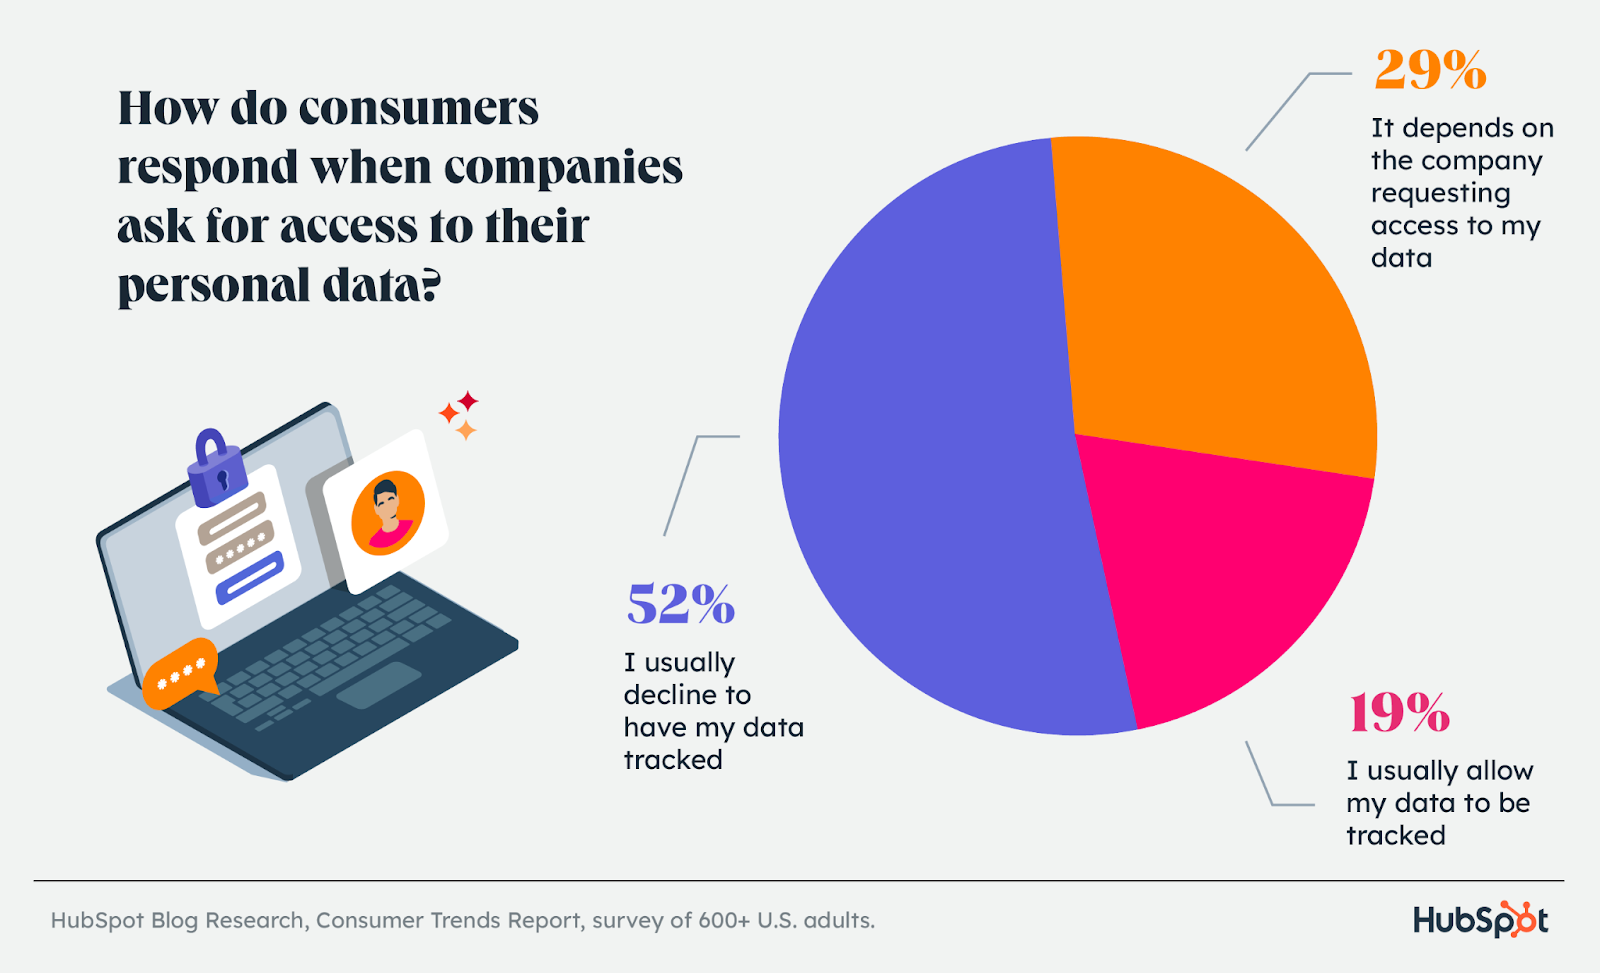 how consumers respond when asked for data